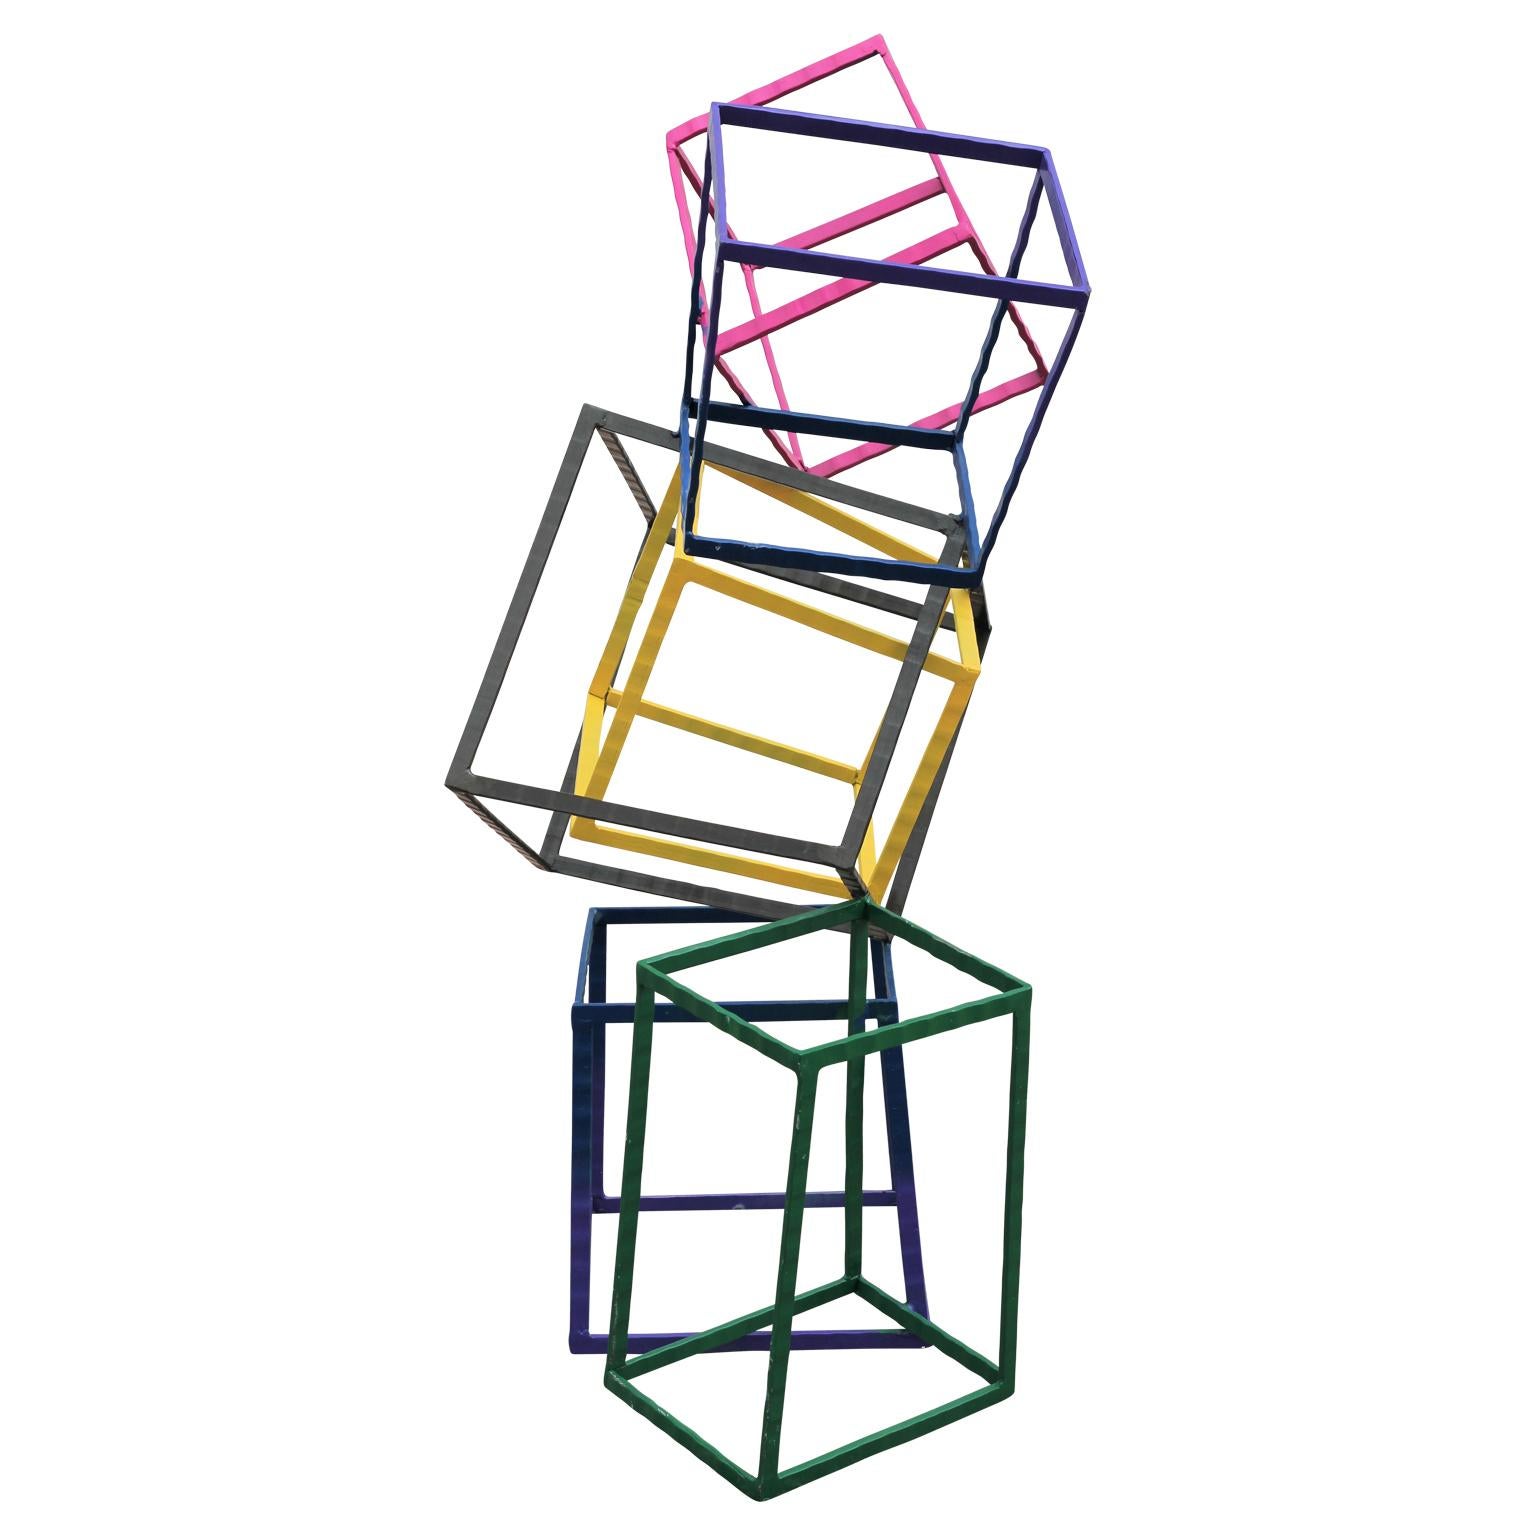 Colorful geometric sculpture that includes a variety of square boxes stacked on top of one another. The unique sculpture consists of welded metal that has been painted in a number of bright color that evokes Post Modern design.